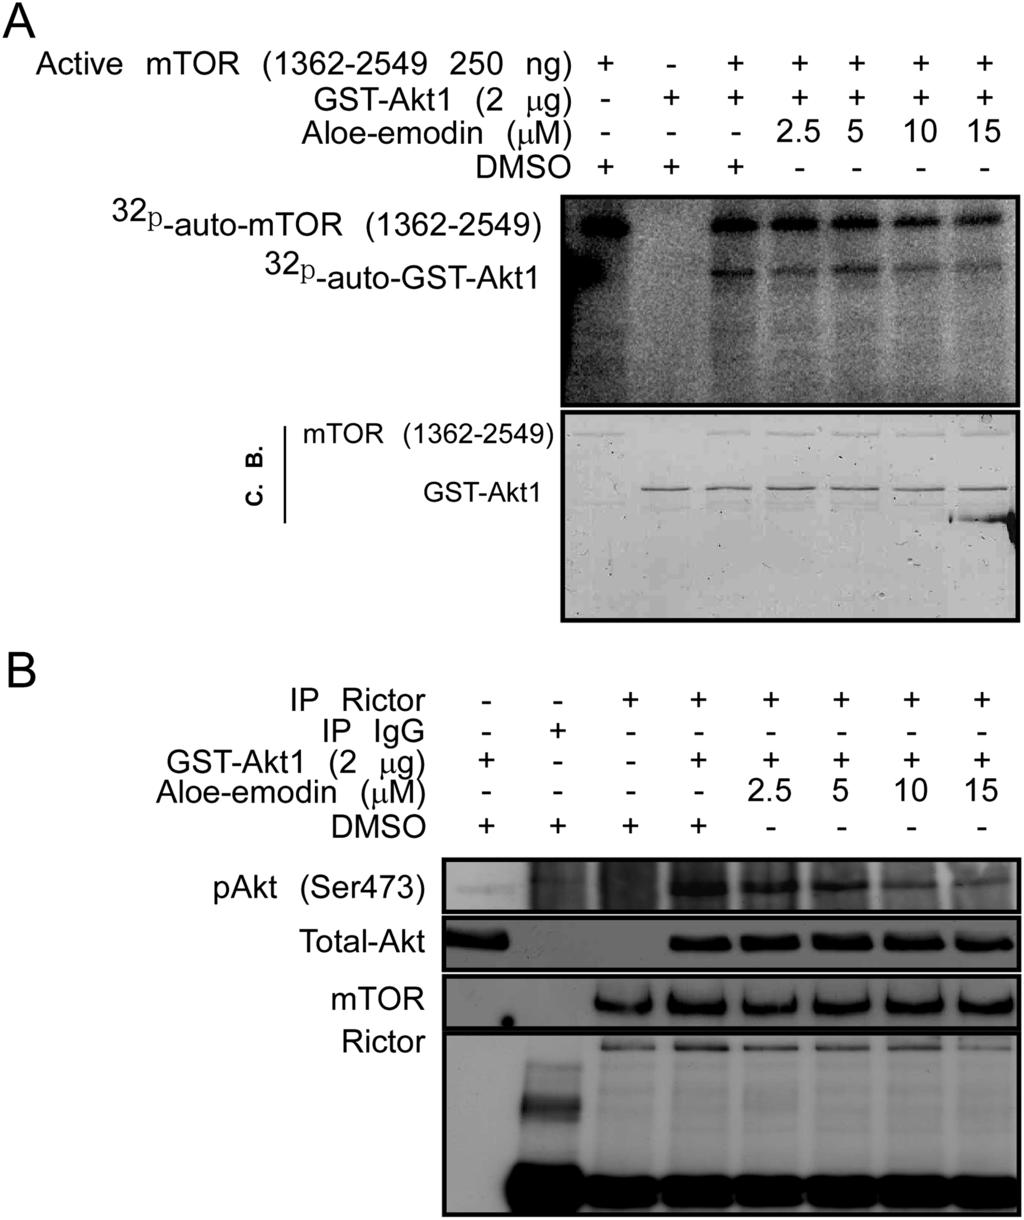 (B) Aloe-emodin binds with ectopically expressed Rictor or msin1 isoforms in cells. Plasmids containing myc-rictor, myc-msin1.1, myc-msin1.2, myc-msin1.